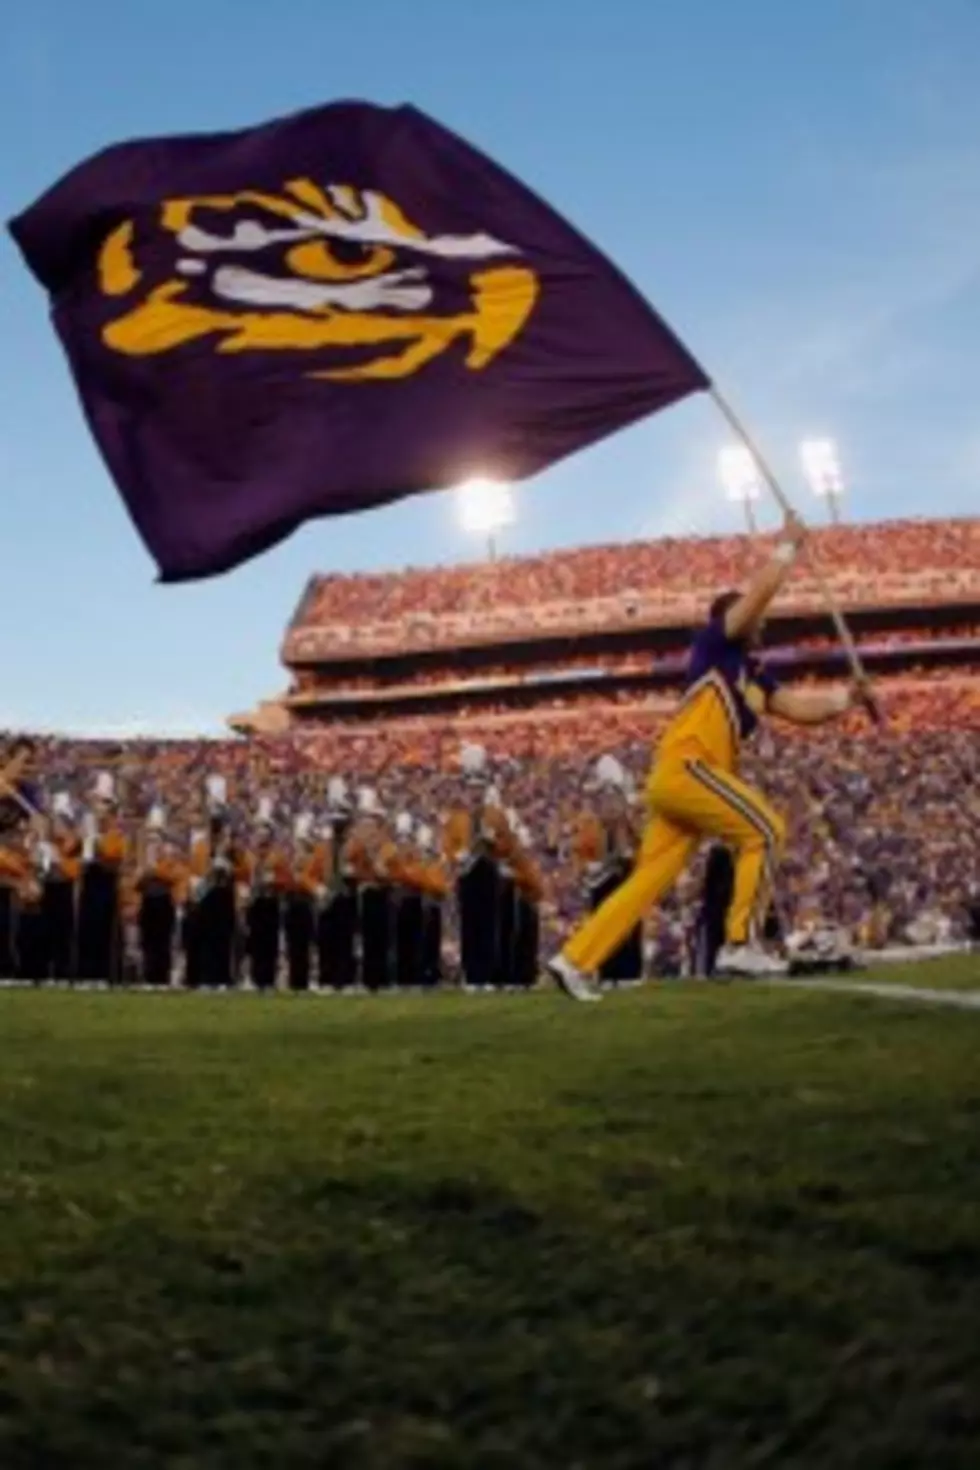 Beer Sales At Tiger Stadium? Probably Not Anytime Soon